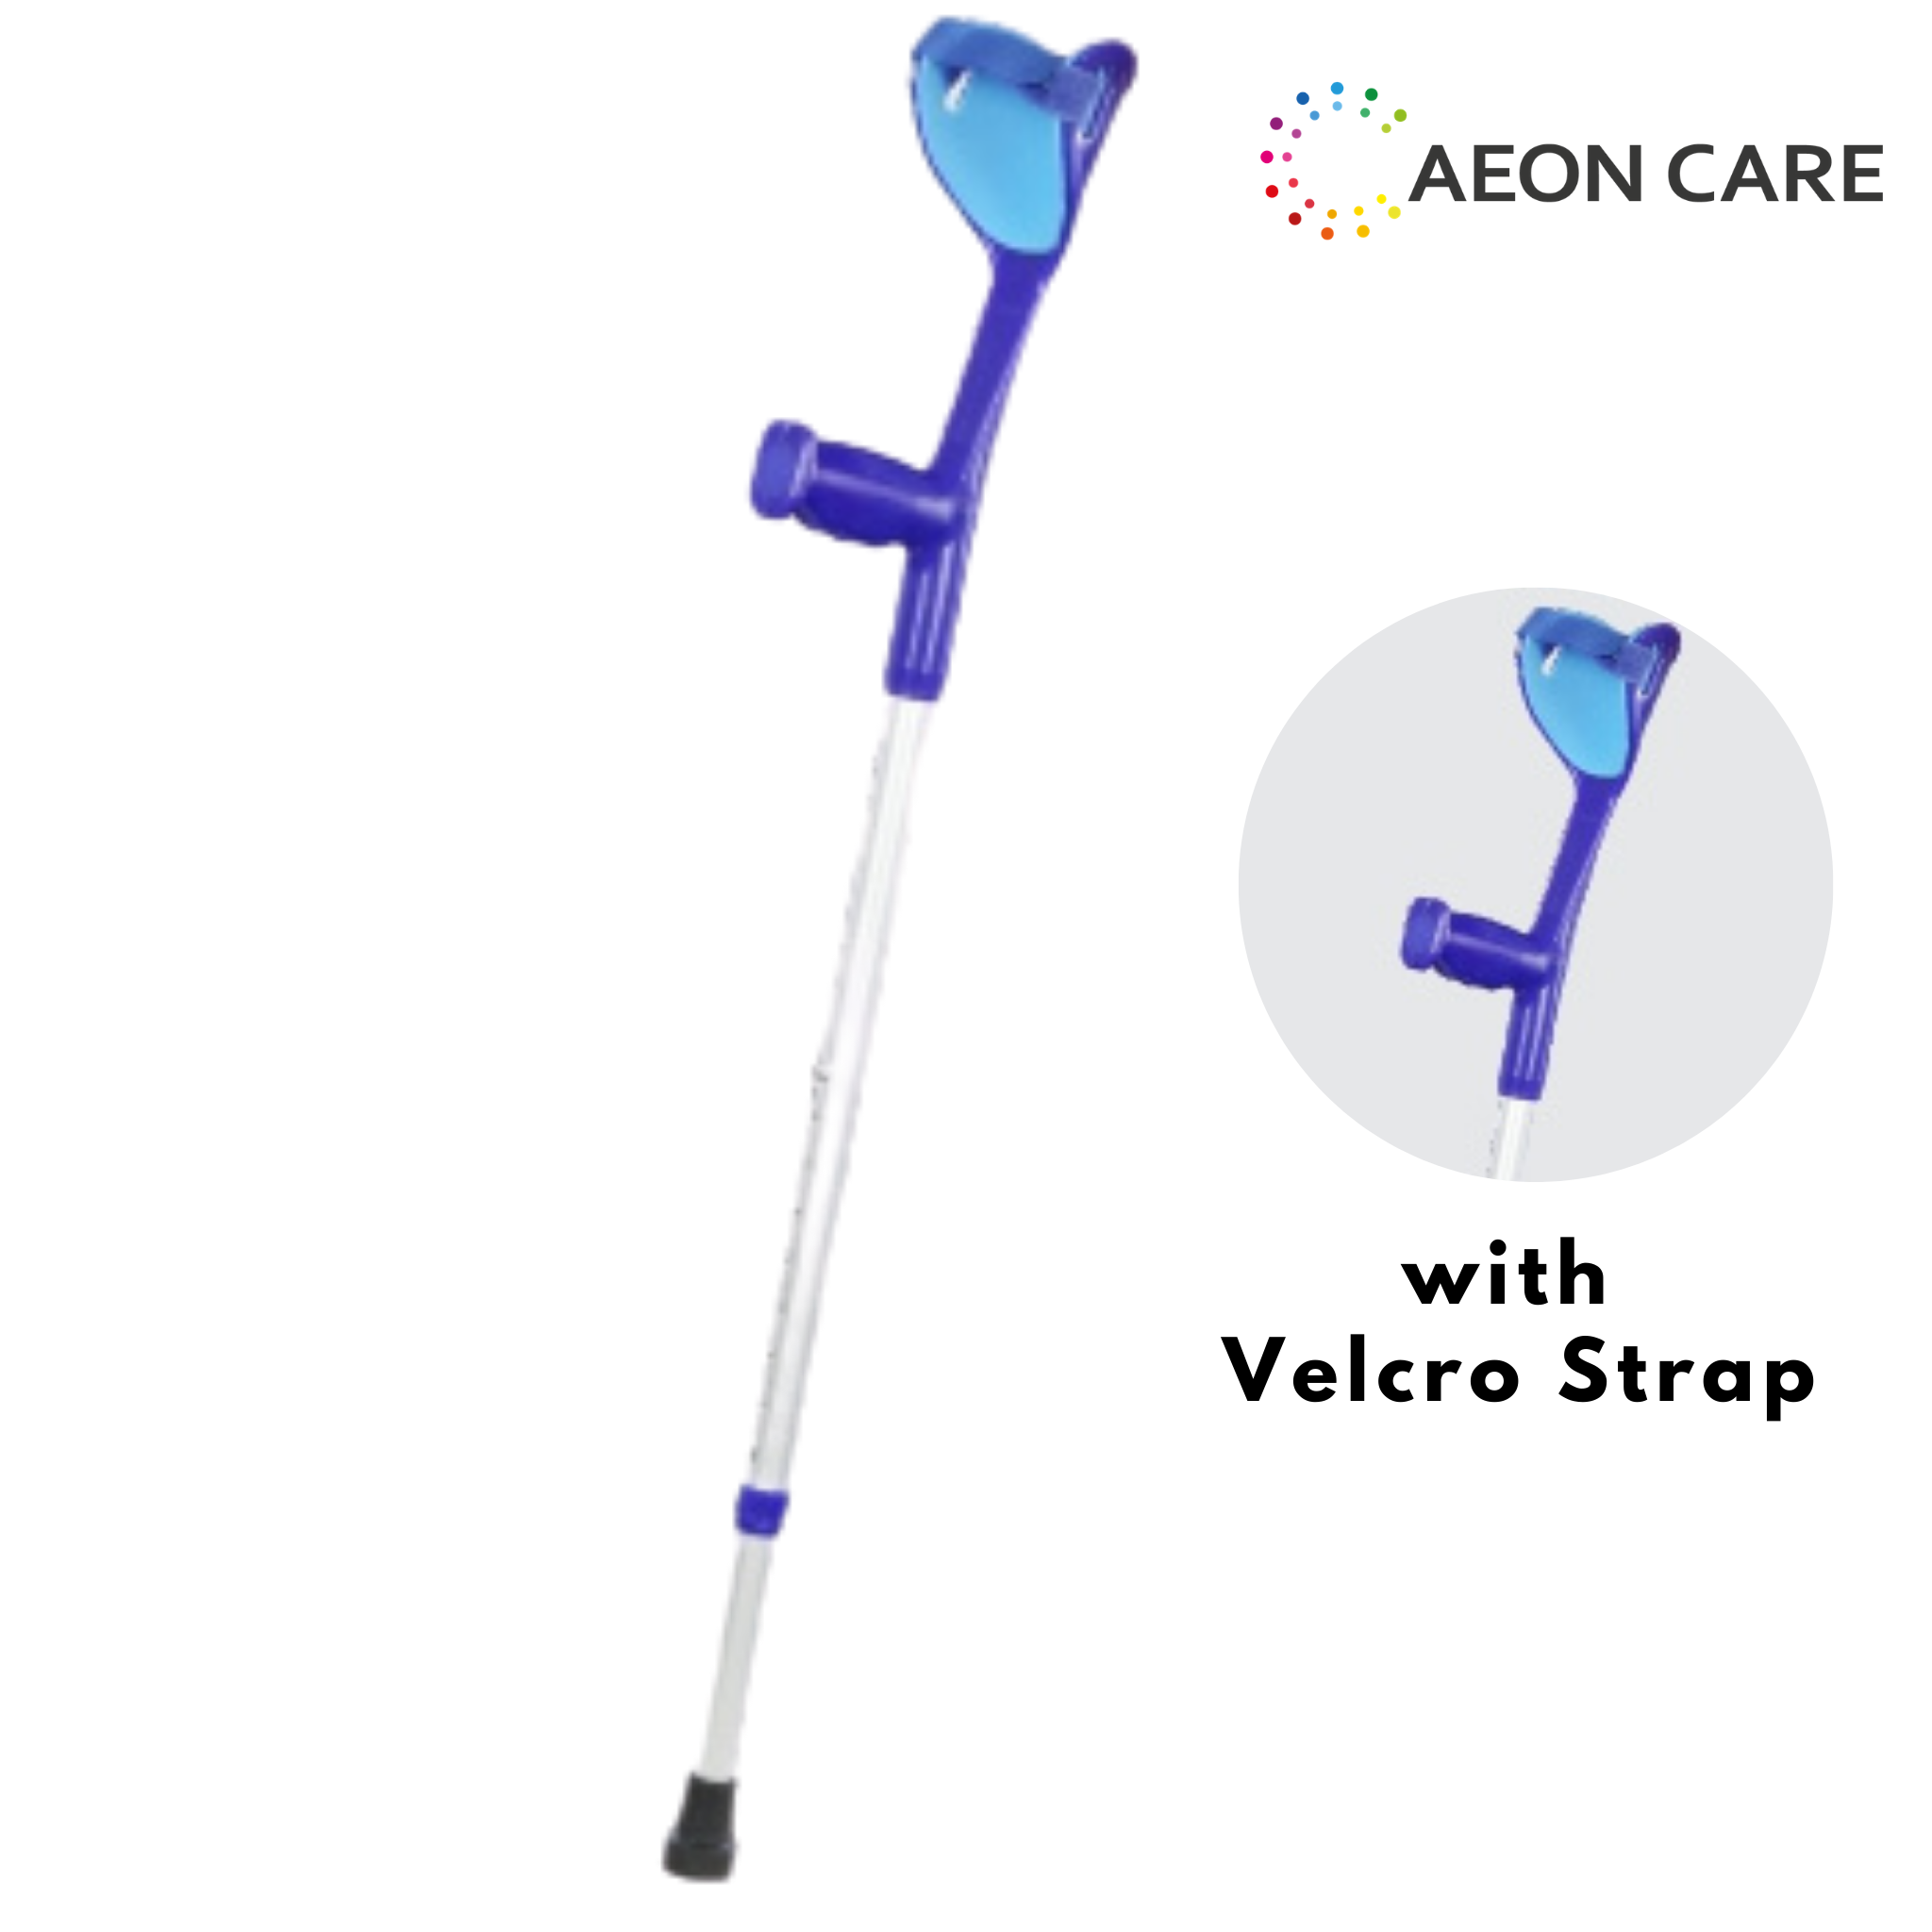 Velcro Strap Elbow Crutch is used for mobility aids